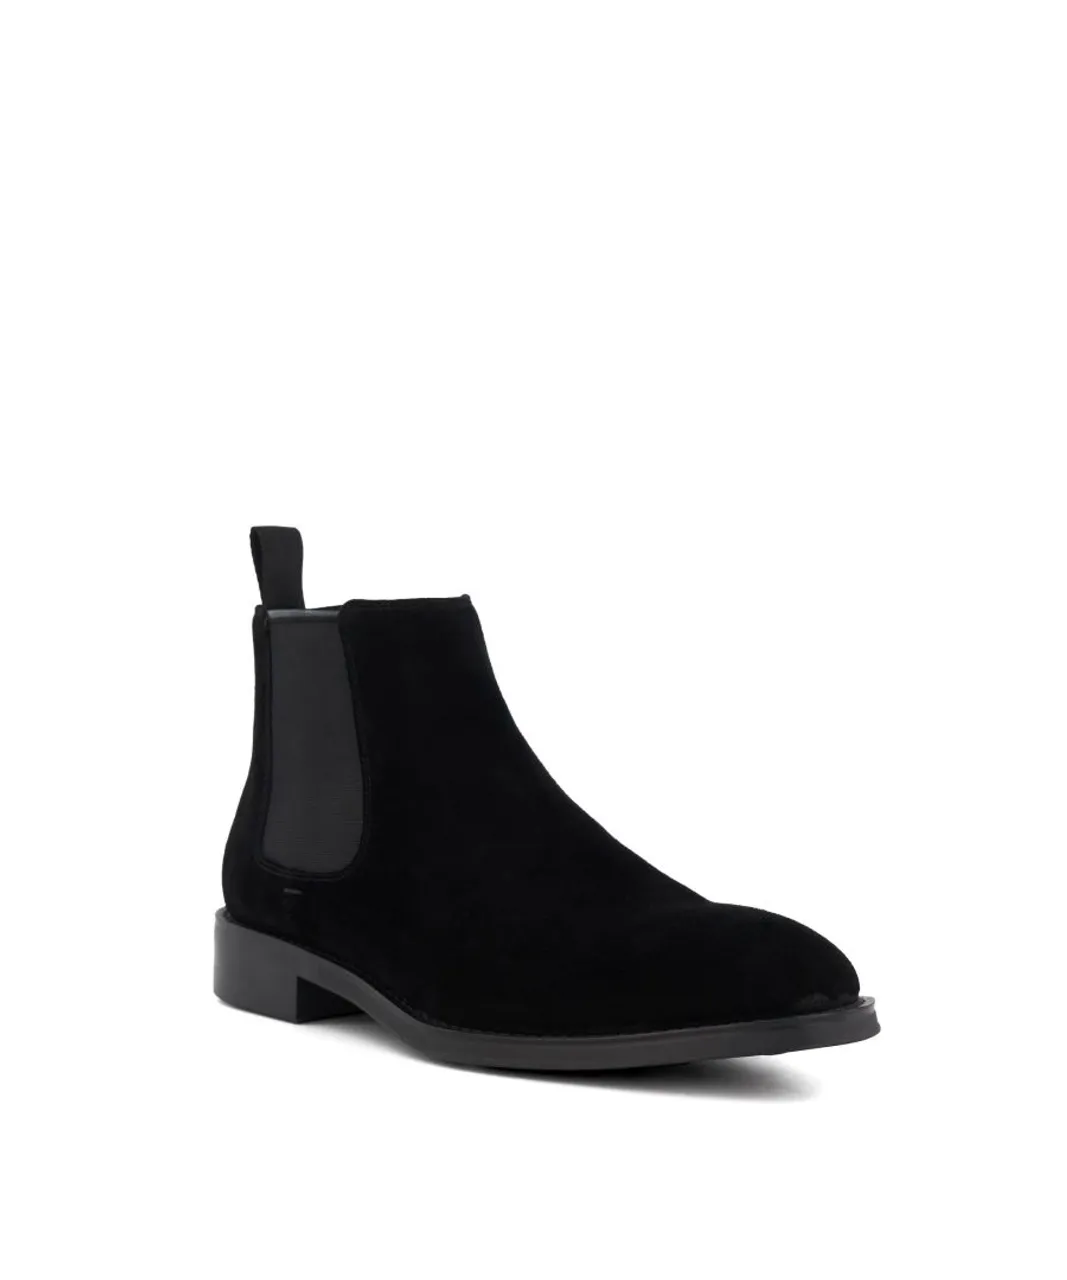 Dune London Mens MASONS Smart Chelsea Boots - Black Leather (archived)